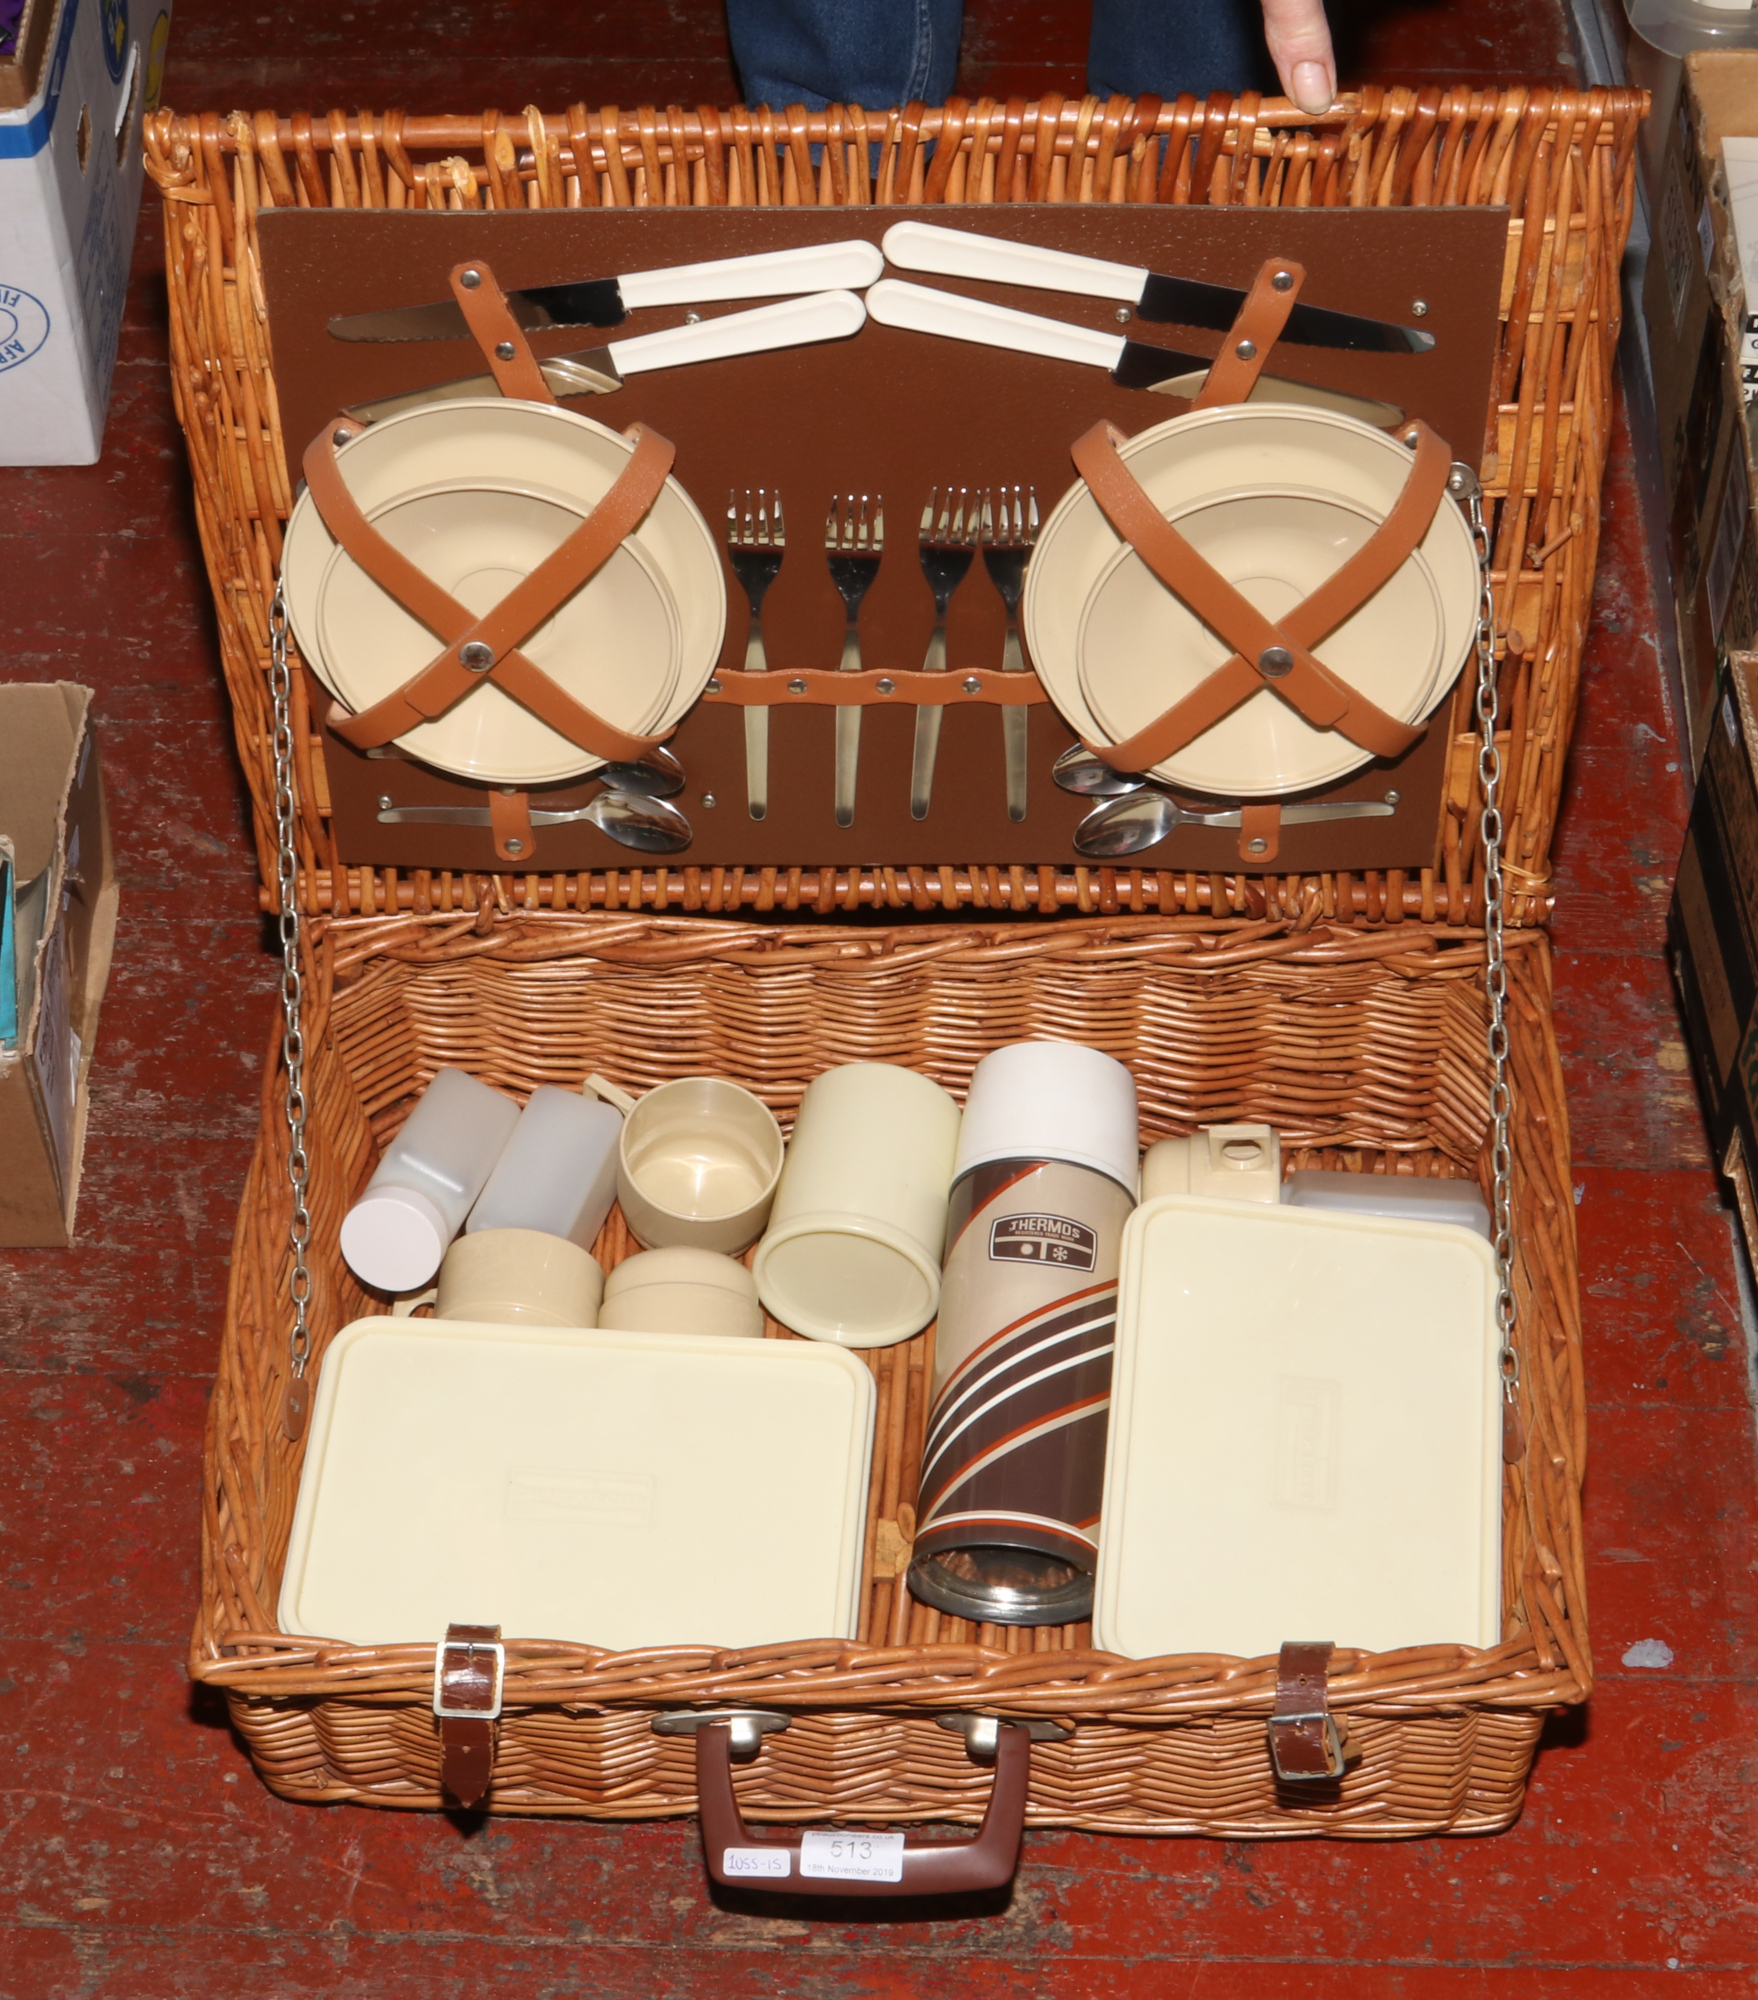 A wicker picnic hamper with contents of stainless steel cutlery and food storage containers.